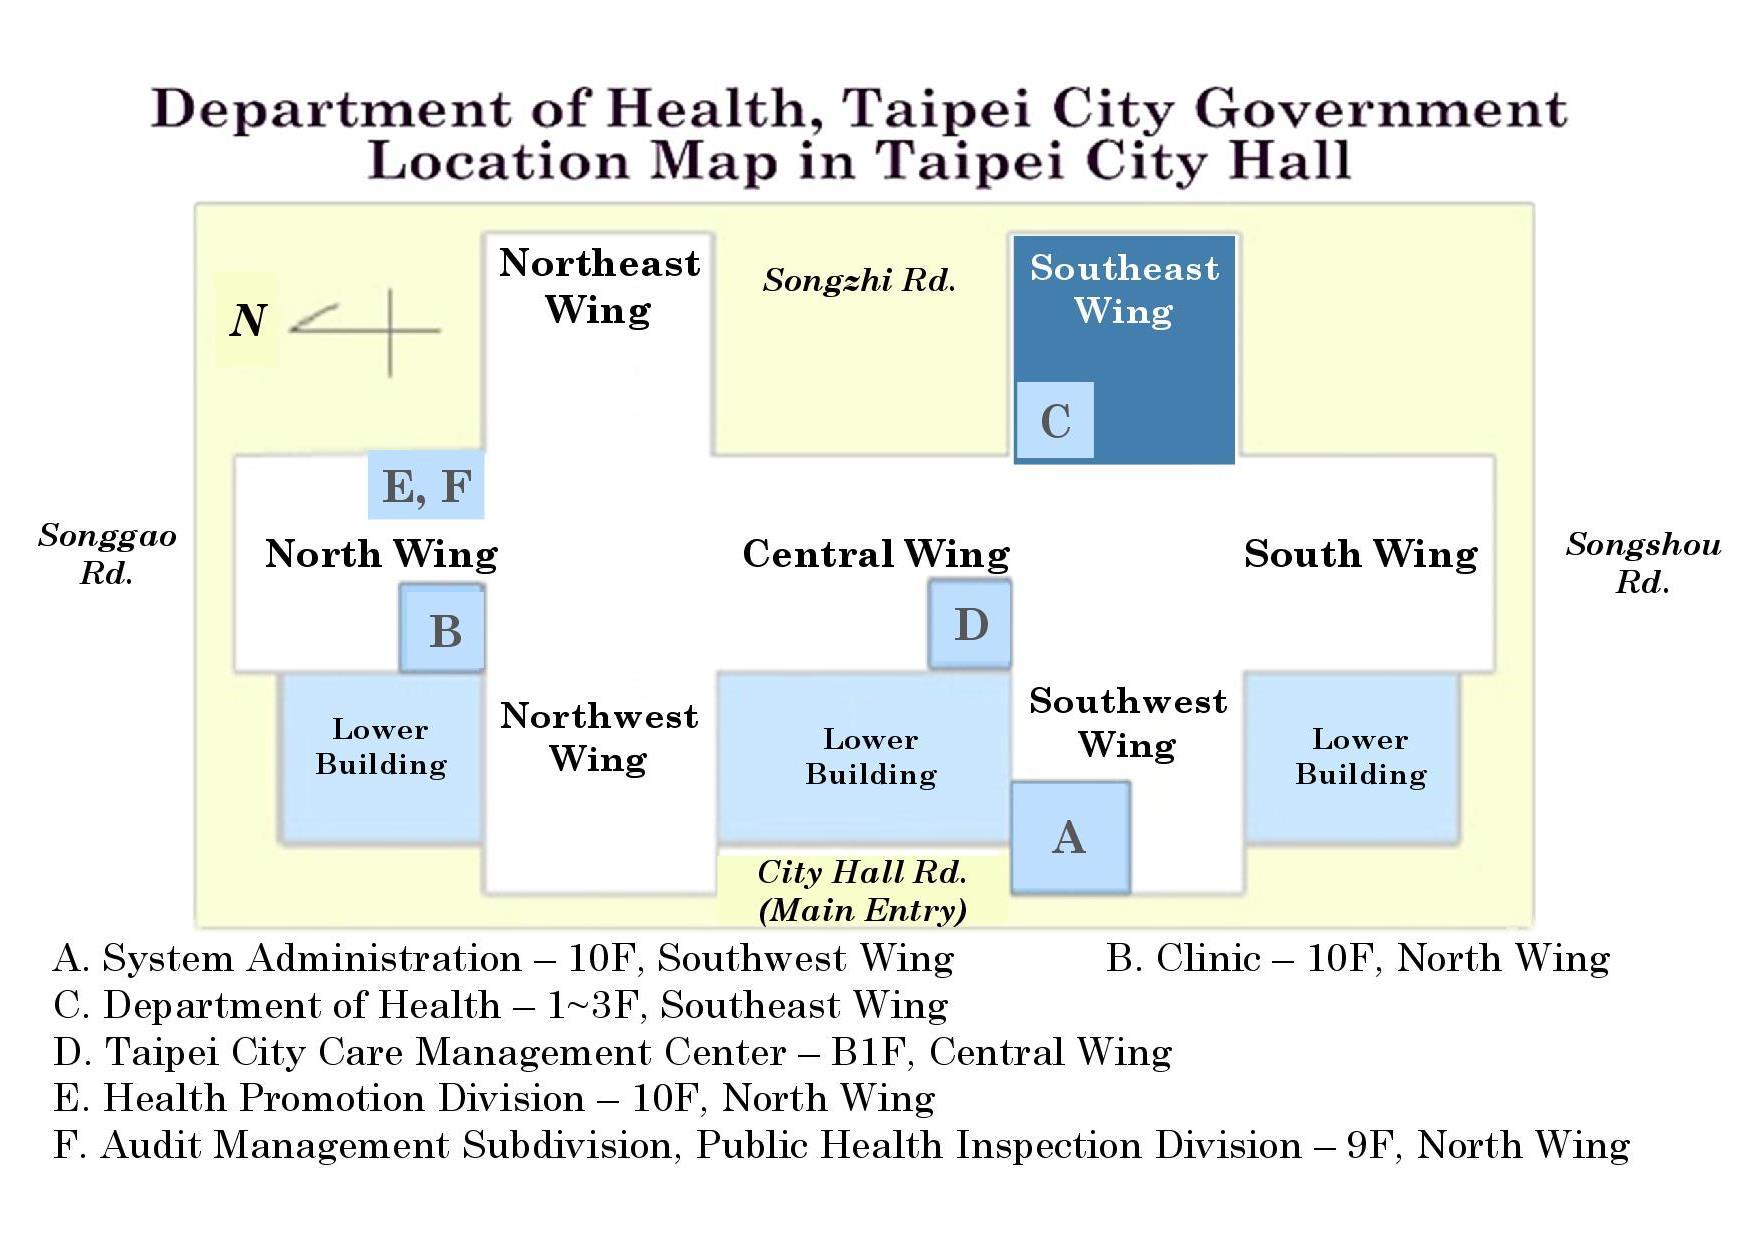 Department of Health, Taipei City Government Location Map in Taipei City Hall